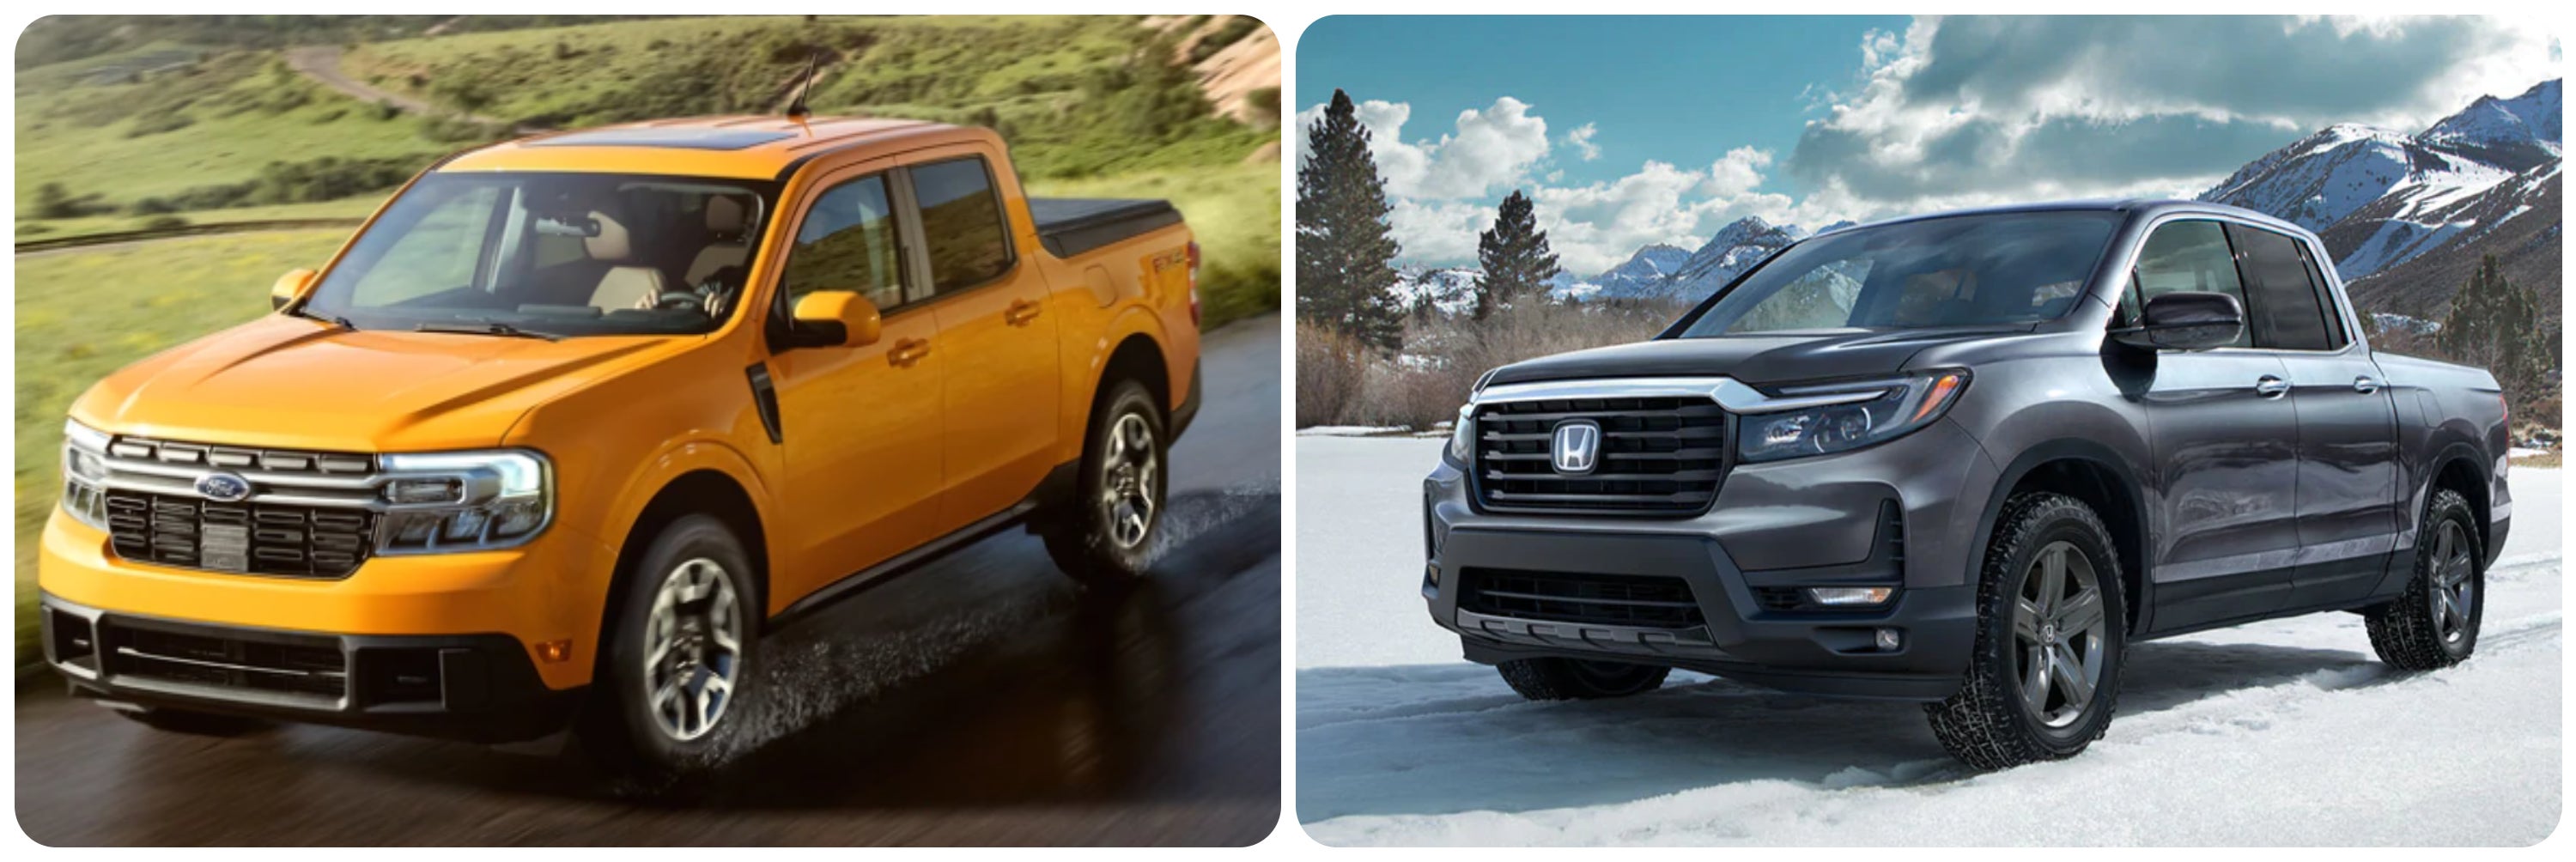 On the left a yellow 2022 Ford Ranger cruising down a country road. On the right a gray 2022 Honda Ridgeline sits parked in a snowy field.